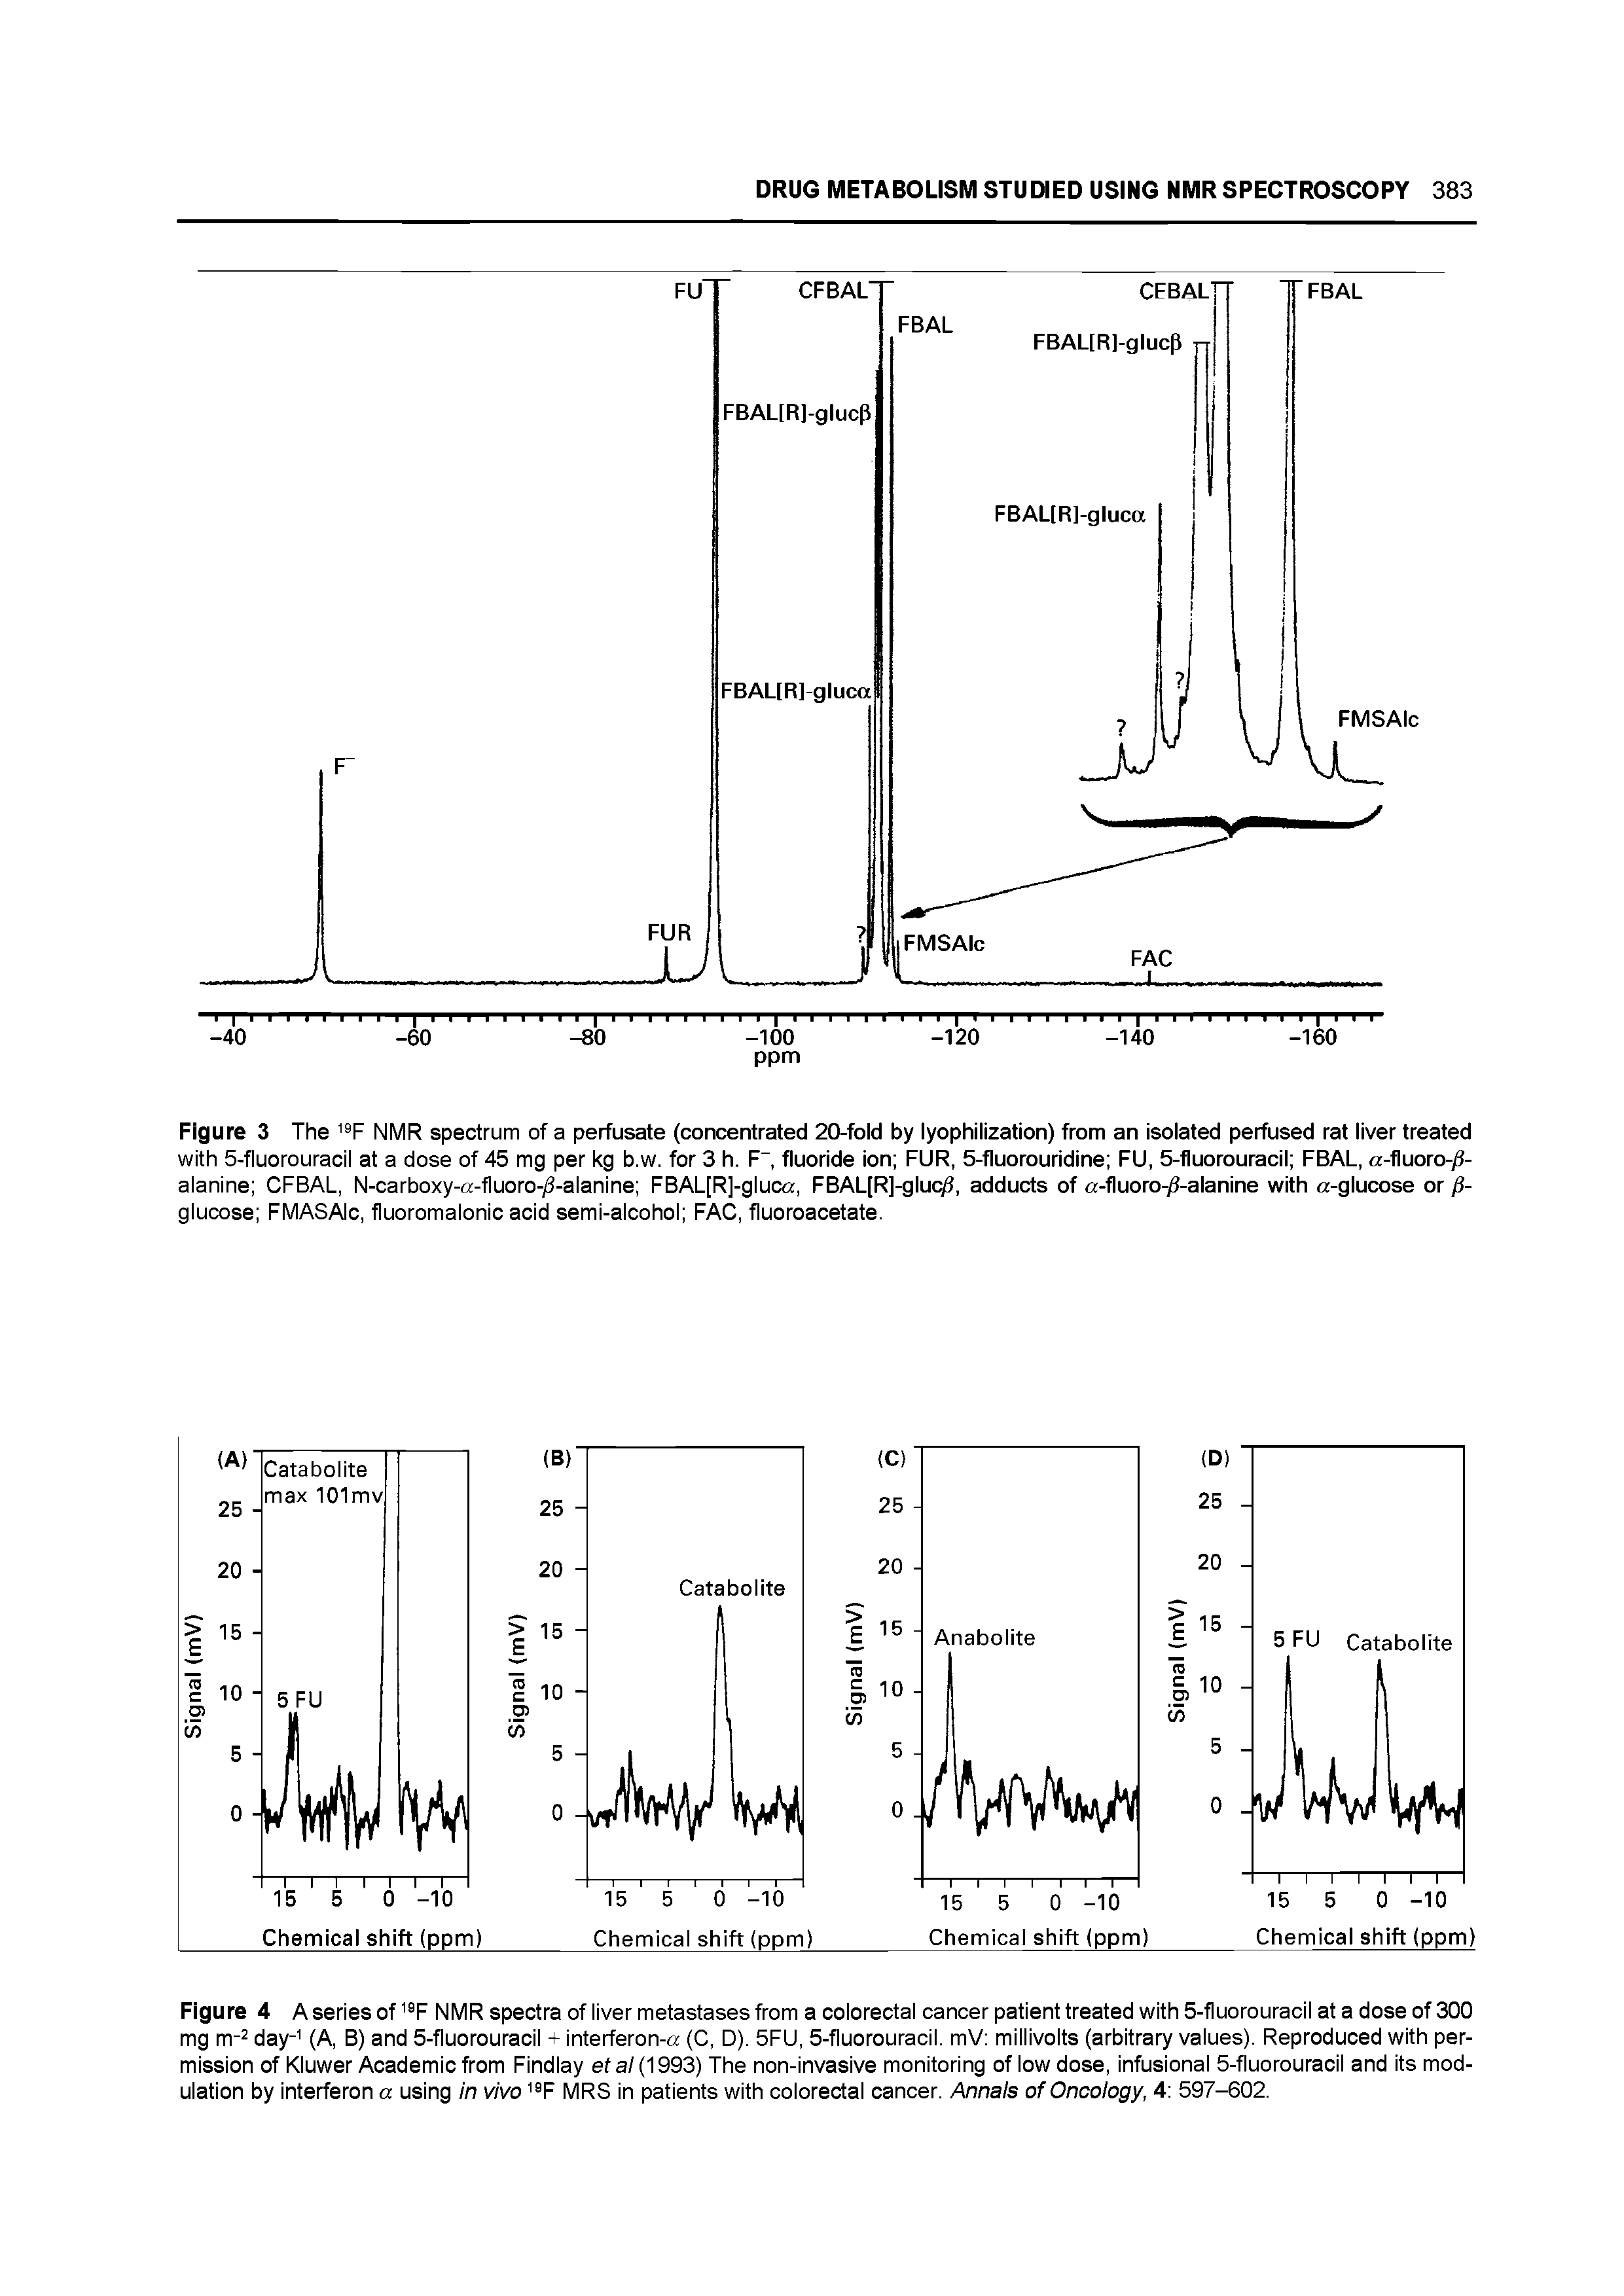 Figure 3 The NMR spectrum of a perfusate (concentrated 20-fold by lyophilization) from an isolated perfused rat liver treated with 5-fluorouracil at a dose of 45 mg per kg b.w. for 3 h. F , fluoride ion FUR, 5-fluorouridine FU, 5-fluorouracil FBAL, a-fluoro- -alanine CFBAL, N-carboxy-a-fluoro-/3-alanine FBAL[R]-gluca, FBAL[R]-glucvS, adducts of a-fluoro- -alanine with a-glucose or glucose FMASAIc, fluoromalonic acid semi-aicohci FAC, fiuoroacetate.